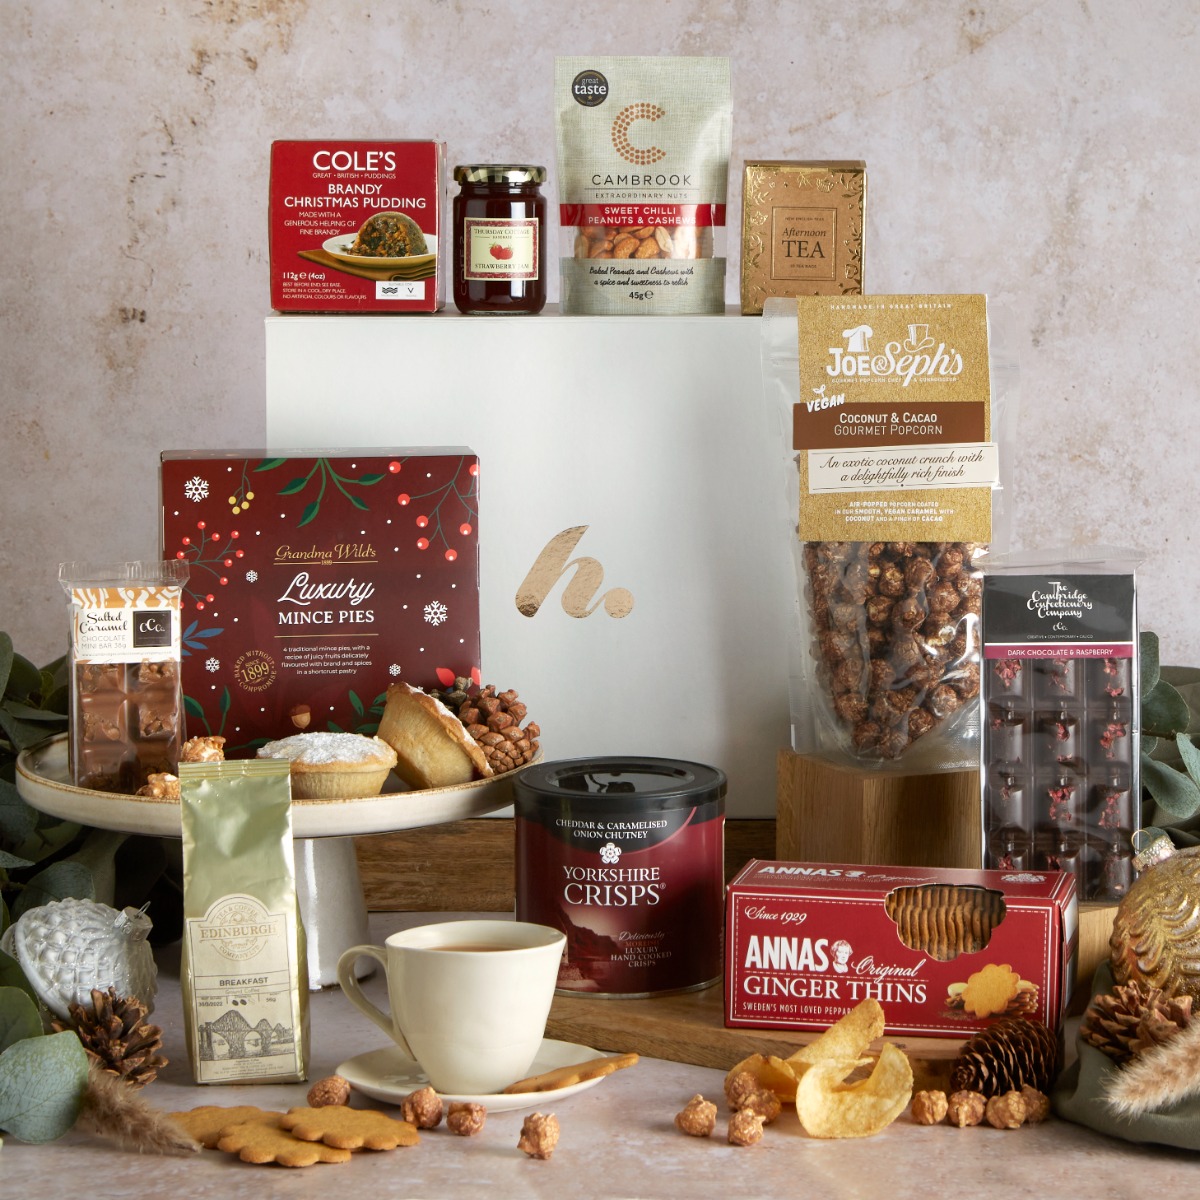 Festive Feast for Everyone hamper with all of its vegan-friendly and gluten-free contents on display